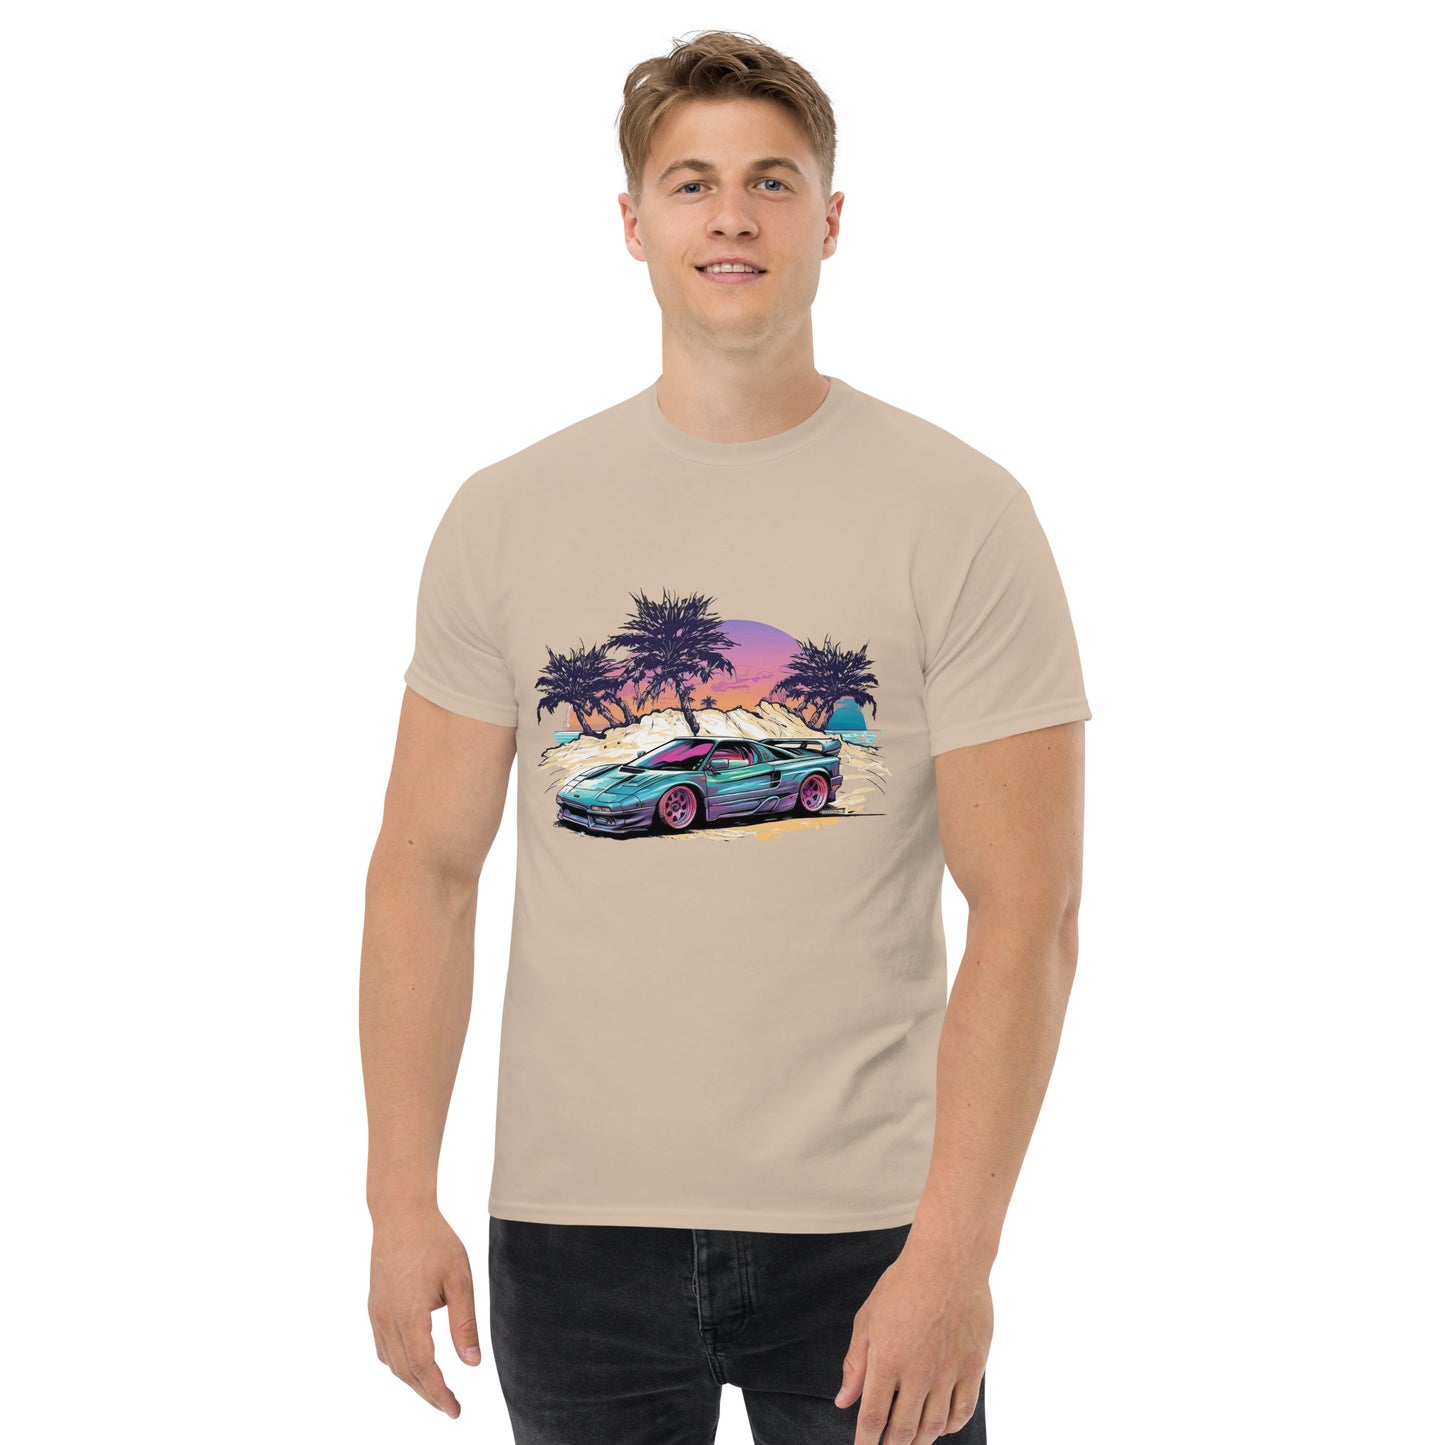 man with sand t-shirt with picture of vintage car in front of palm trees 